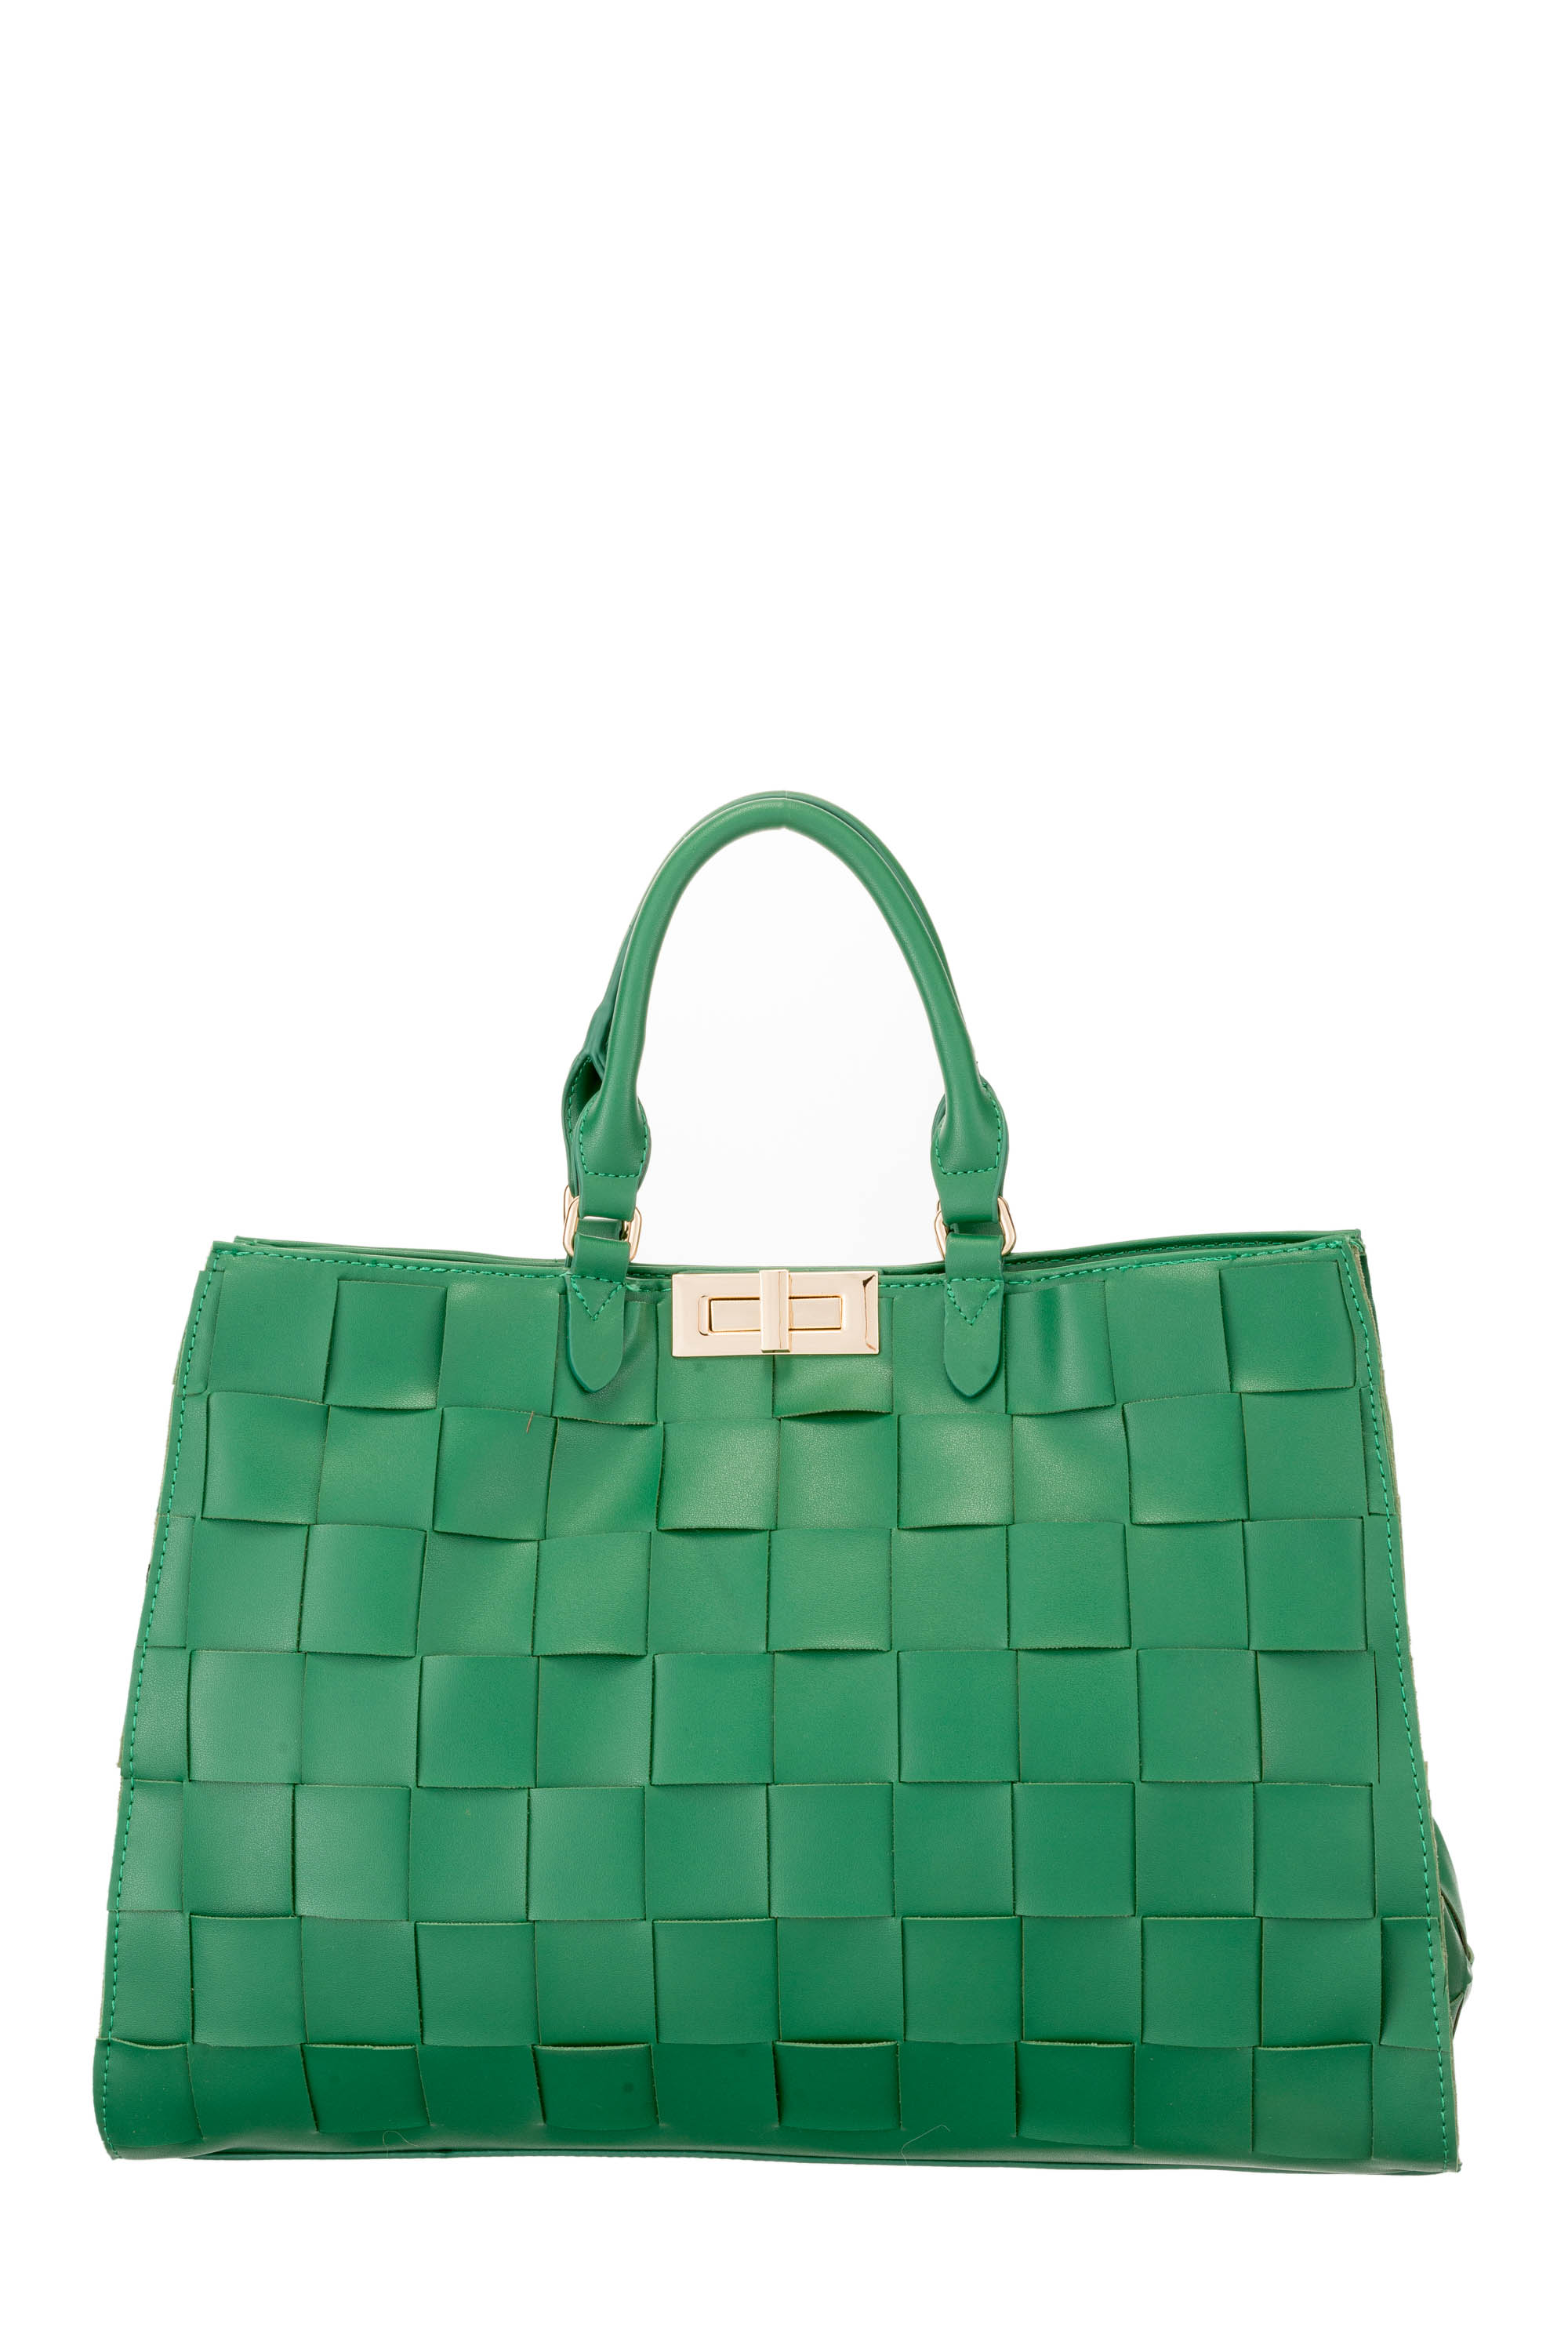 HAND BAG GREEN - STYLE1268